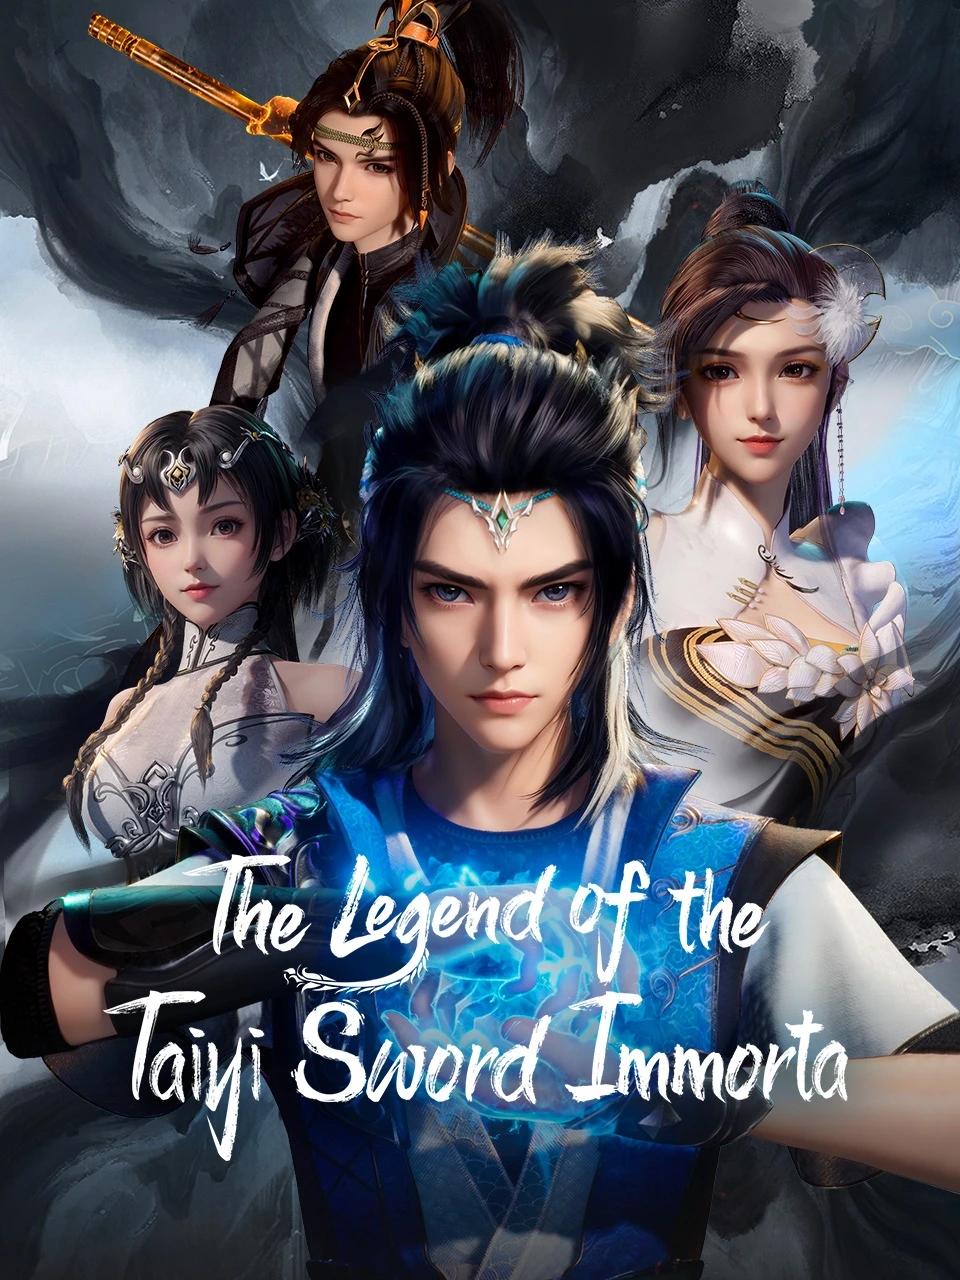 The Legend of the Taiyi Sword Immortal